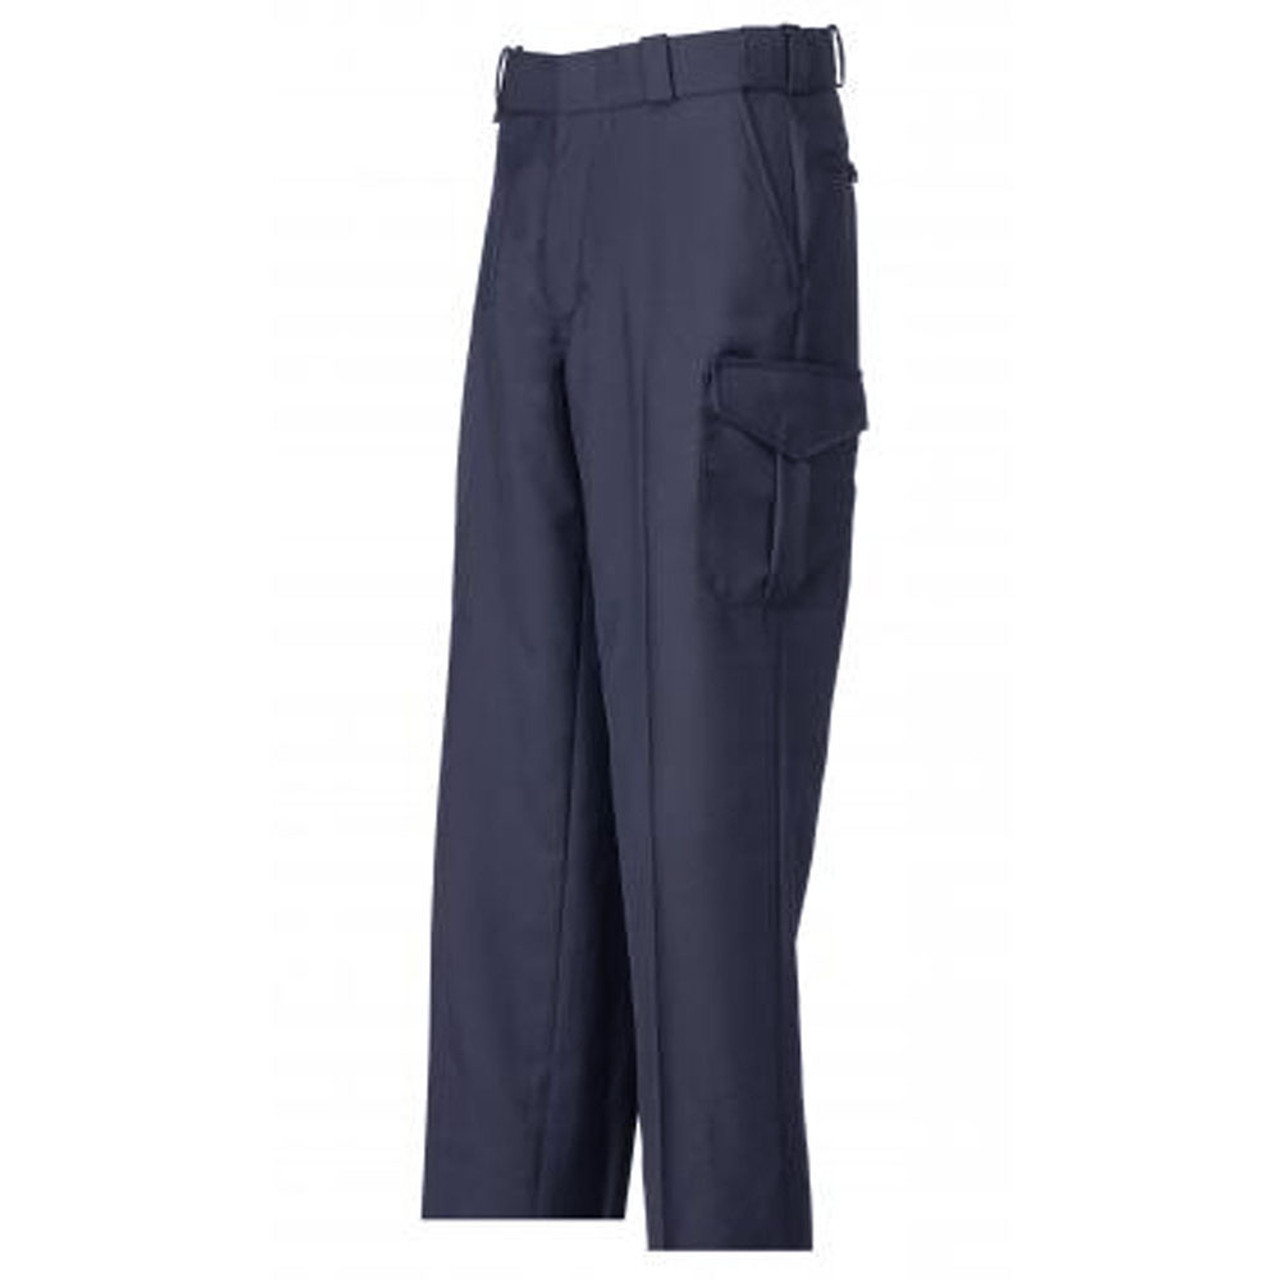 Spiewak SU321 Professional Poly External Men's Cargo Trousers, Uniform or Casual, Expandable Waist, Available in Black and Dark Navy Blue